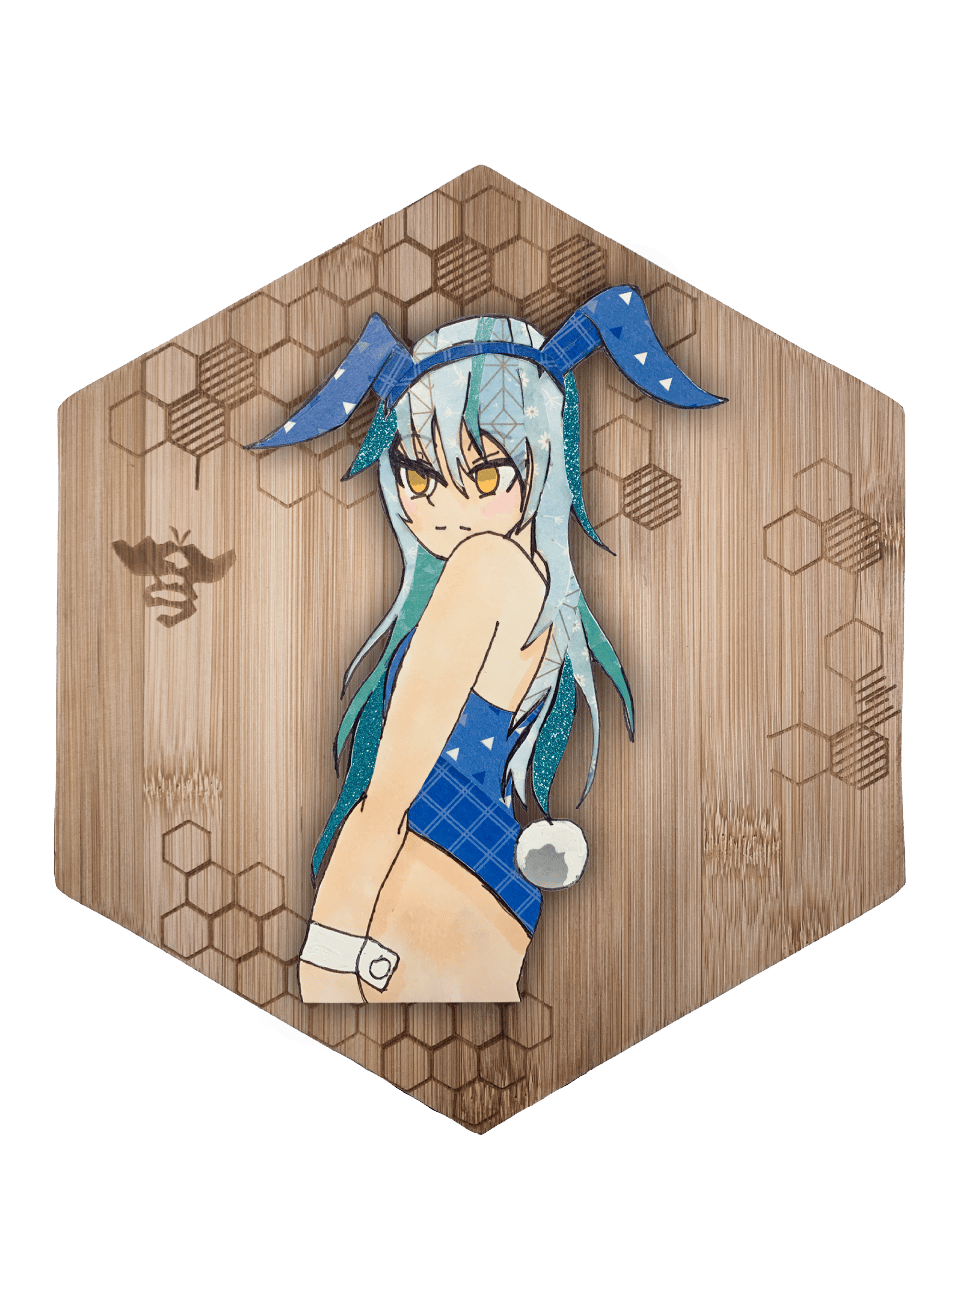 Washi Tape Decal Bunny Rimuru Tempest That Time I Got Reincarnated As A Slime